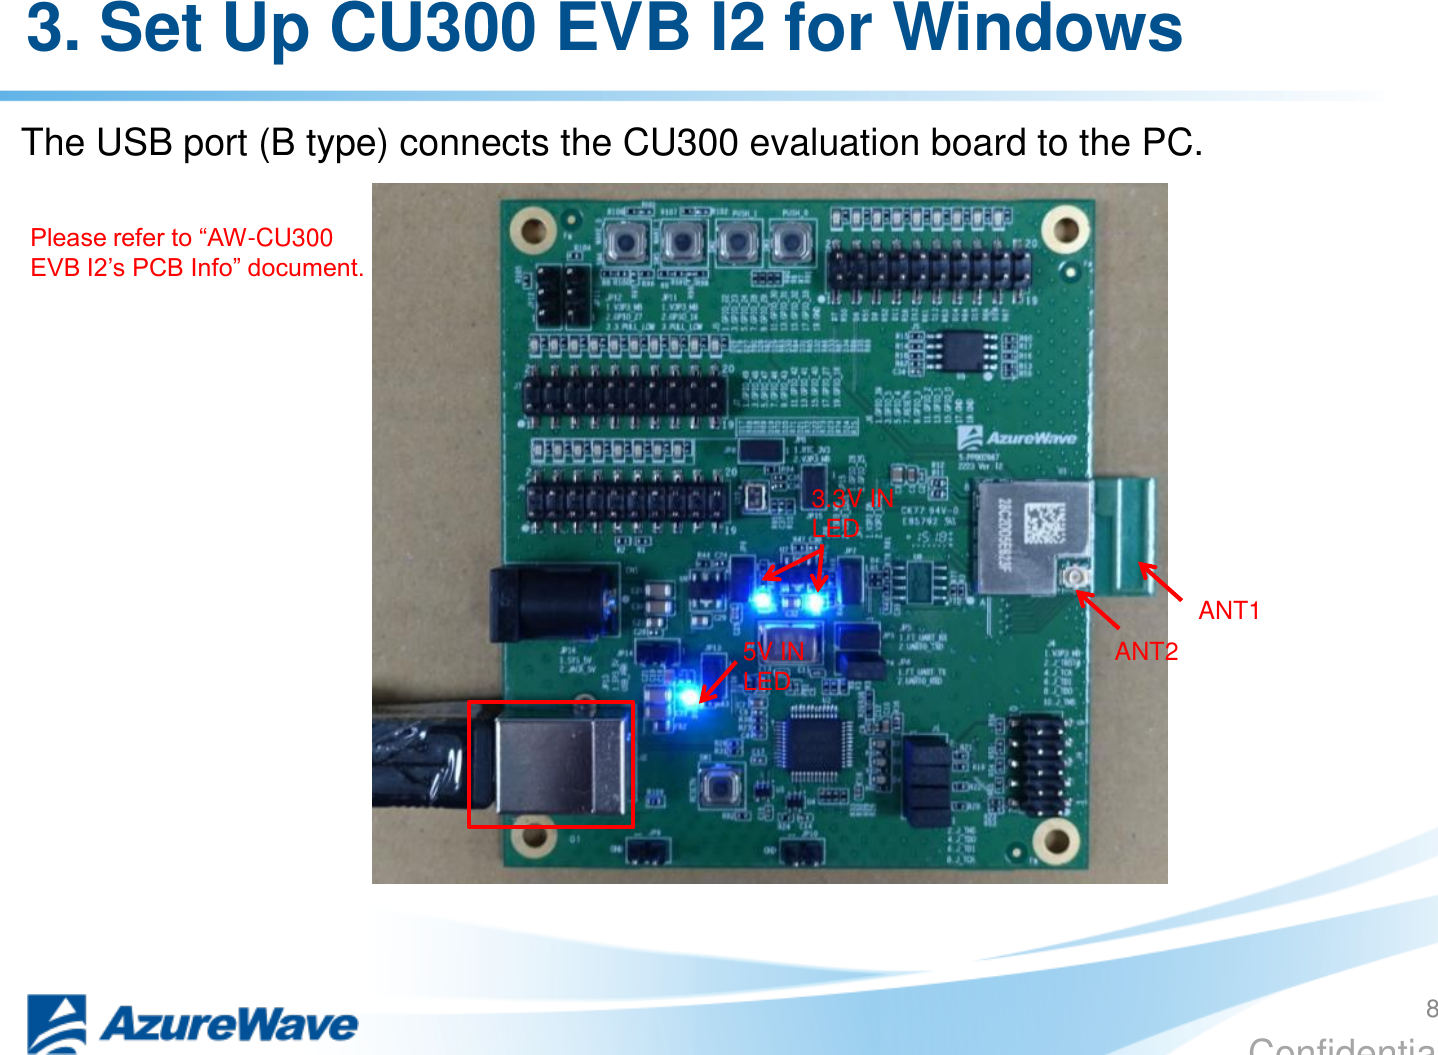 Confidential 3. Set Up CU300 EVB I2 for Windows The USB port (B type) connects the CU300 evaluation board to the PC. ANT2 ANT1 Please refer to “AW-CU300 EVB I2’s PCB Info” document. 8 5V IN LED 3.3V IN LED 